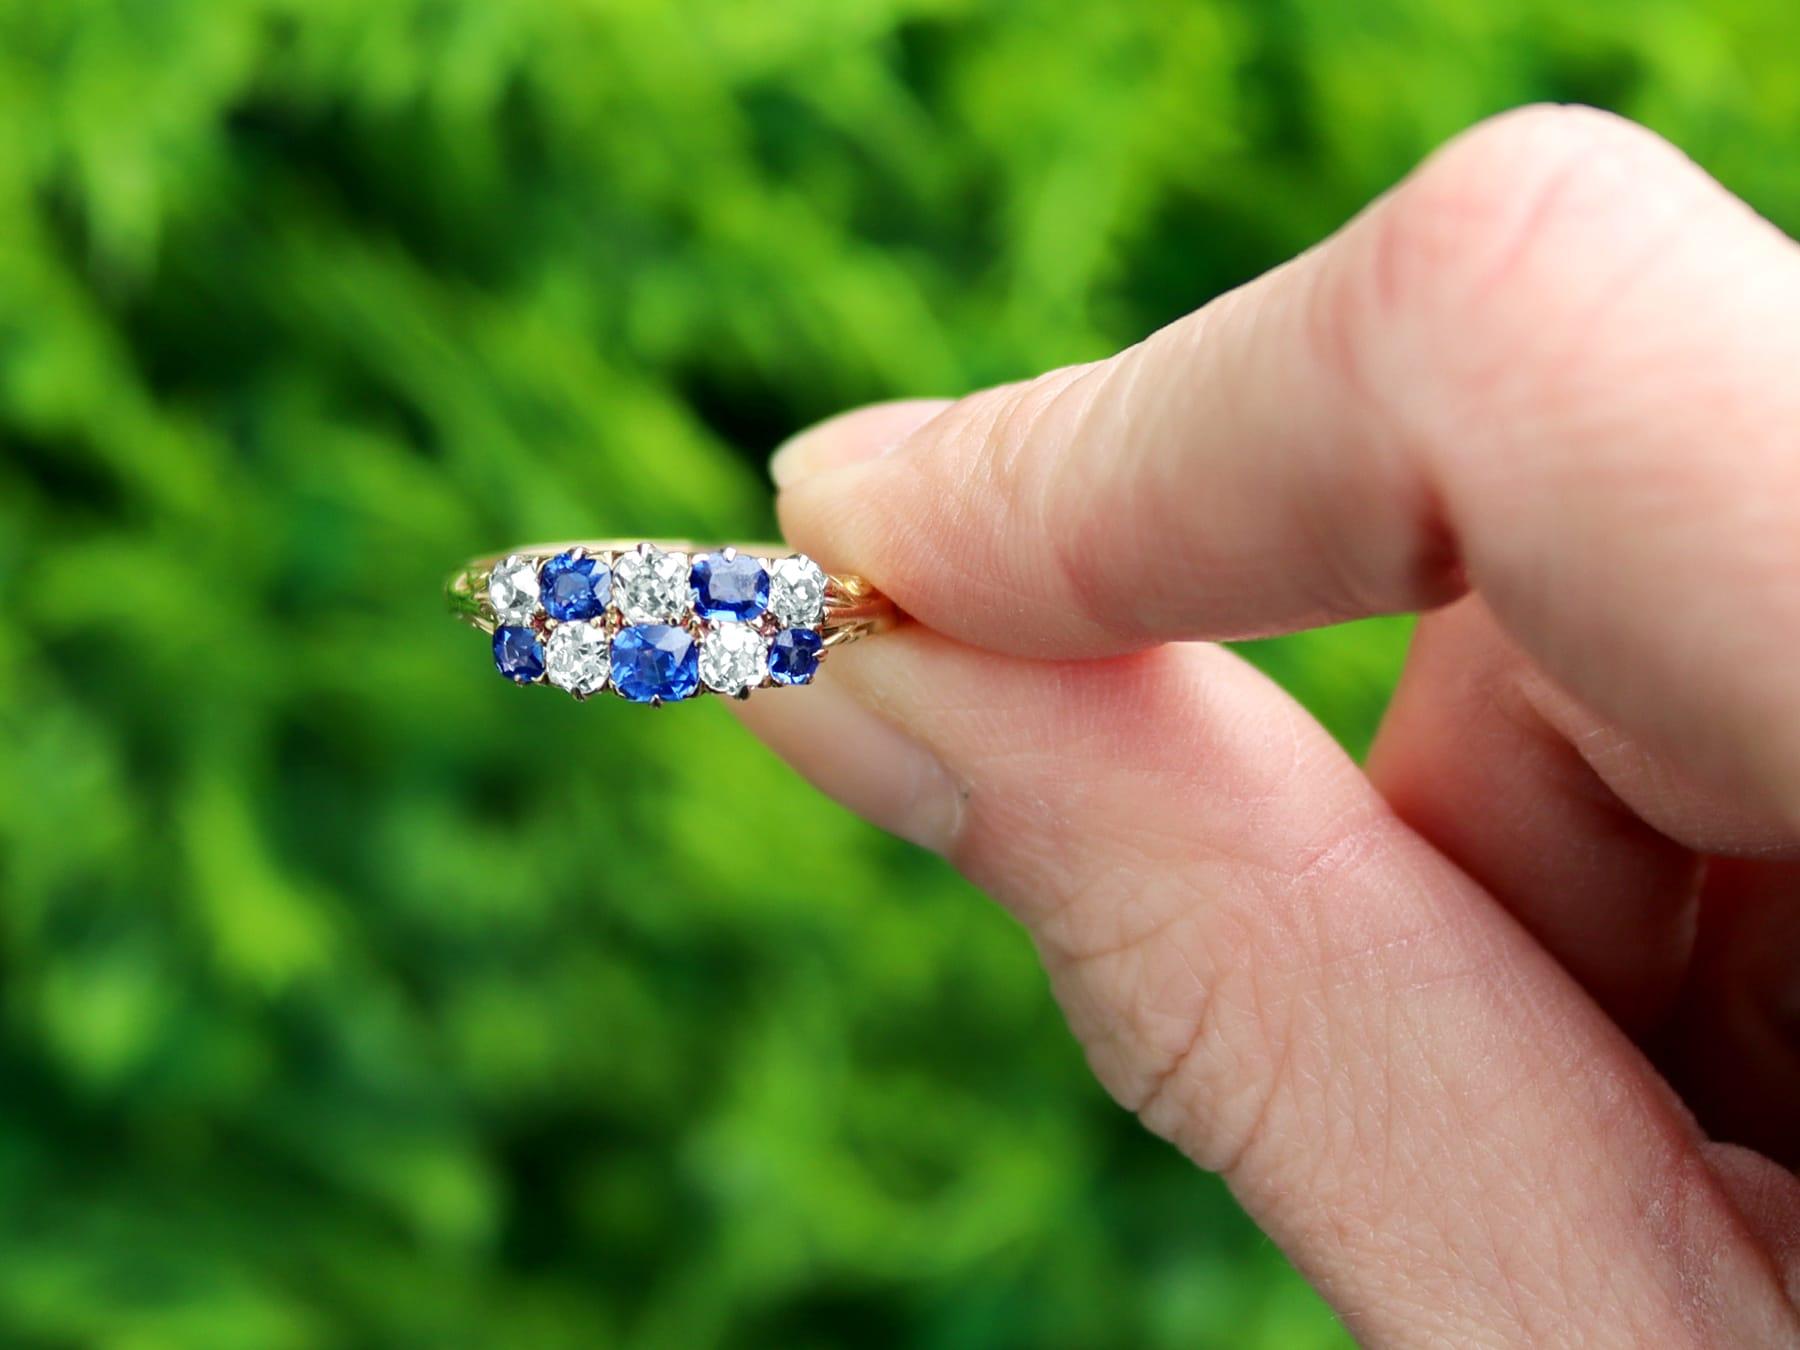 A fine and impressive antique 0.80 carat blue sapphire and 0.62 carat diamond, 18 karat yellow gold dress ring; part of our antique jewelry and estate jewelry collections.

This fine and impressive antique Victorian ring has been crafted in 18k